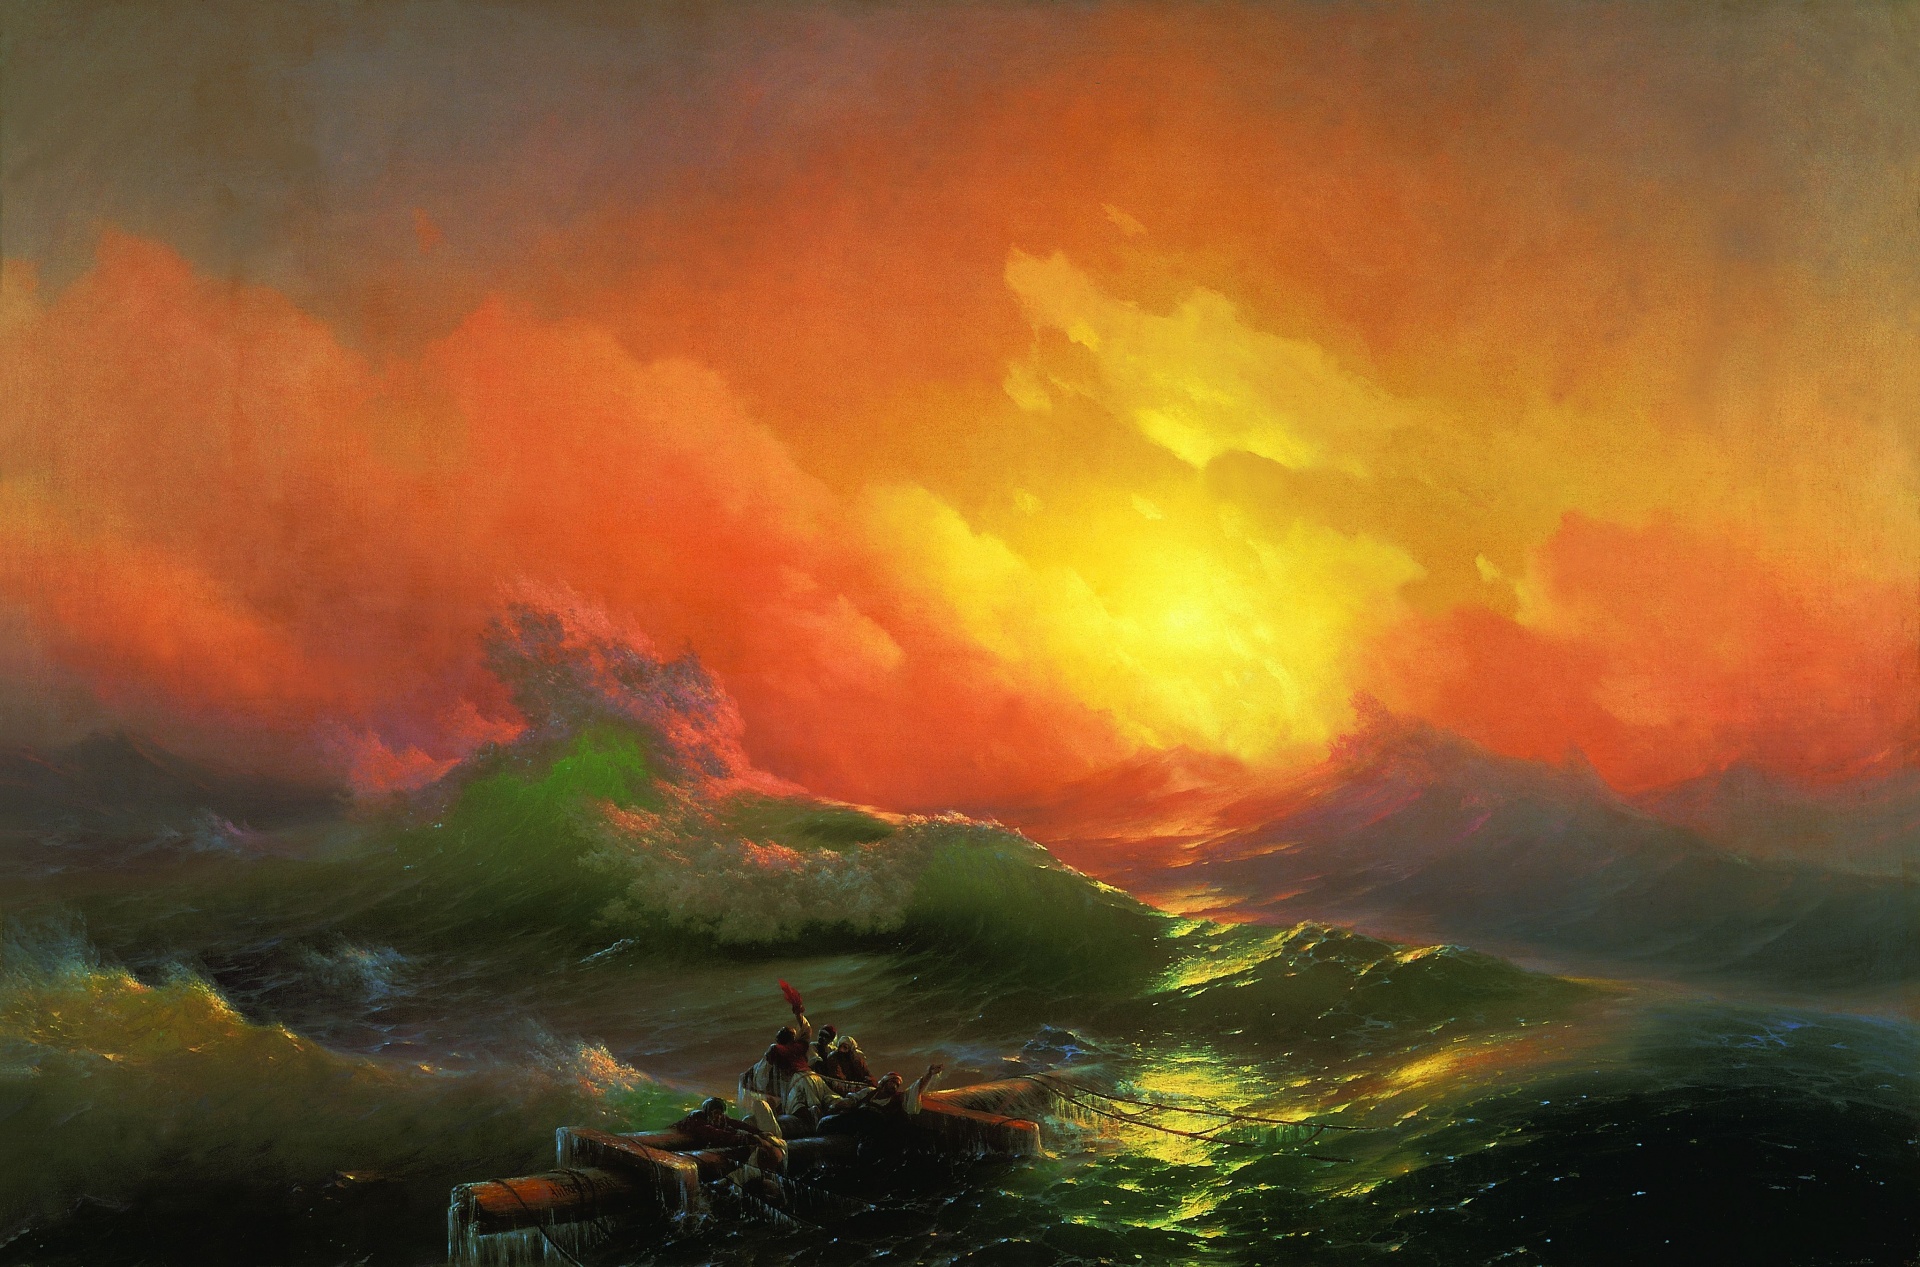 Seascape with a boat in the foreground, huge waves, and a gorgeous sunset